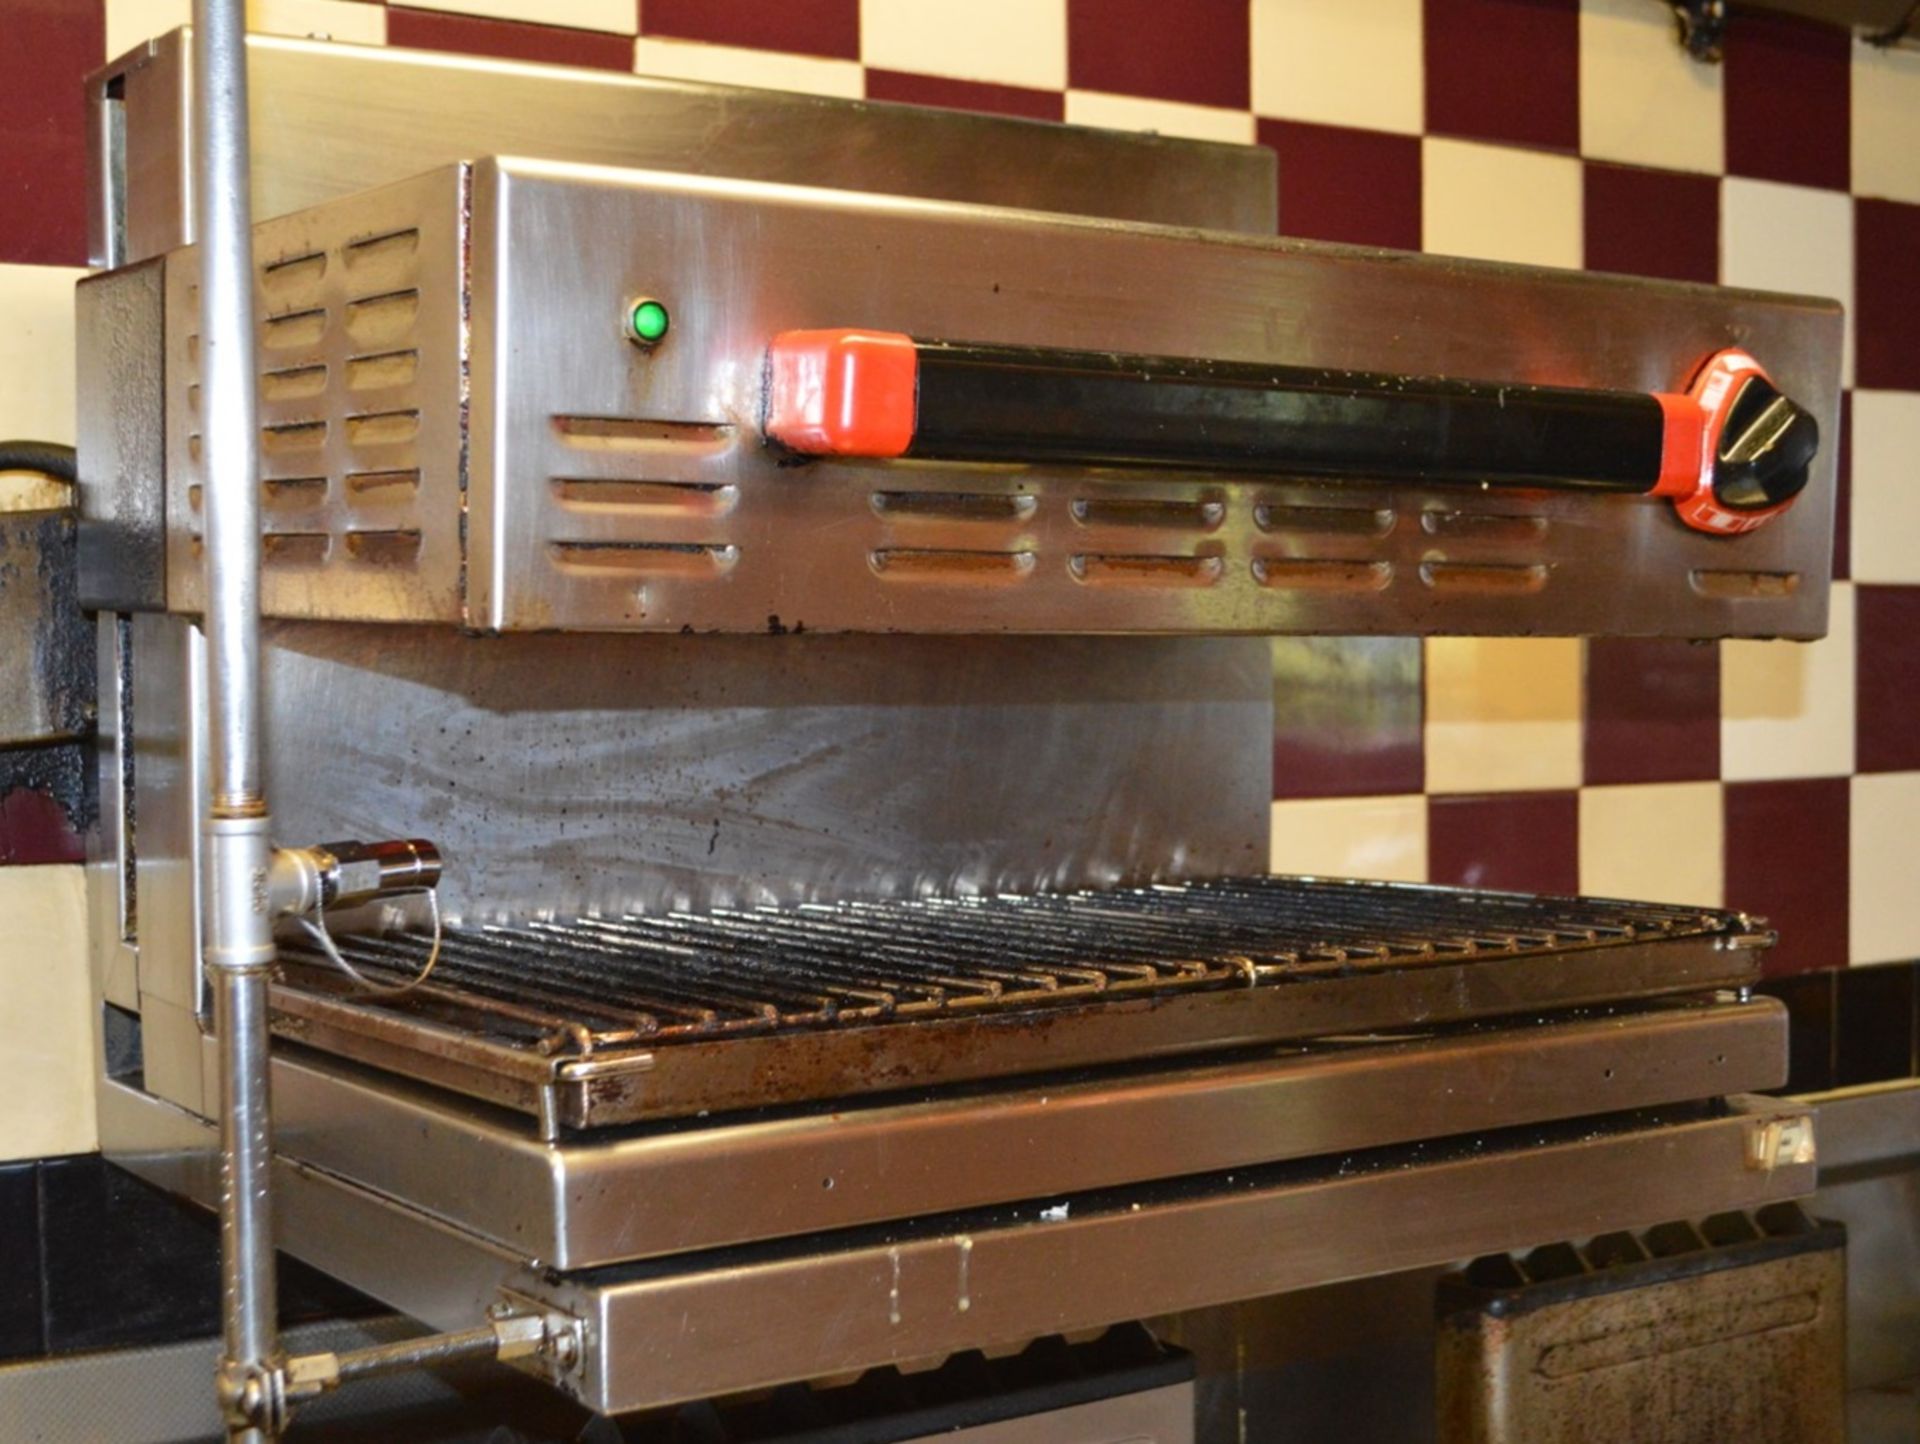 1 x Angelo Po Commercial Salamander Grill With Wall Mounted Shelf - Stainless Steel Construction - Image 2 of 2